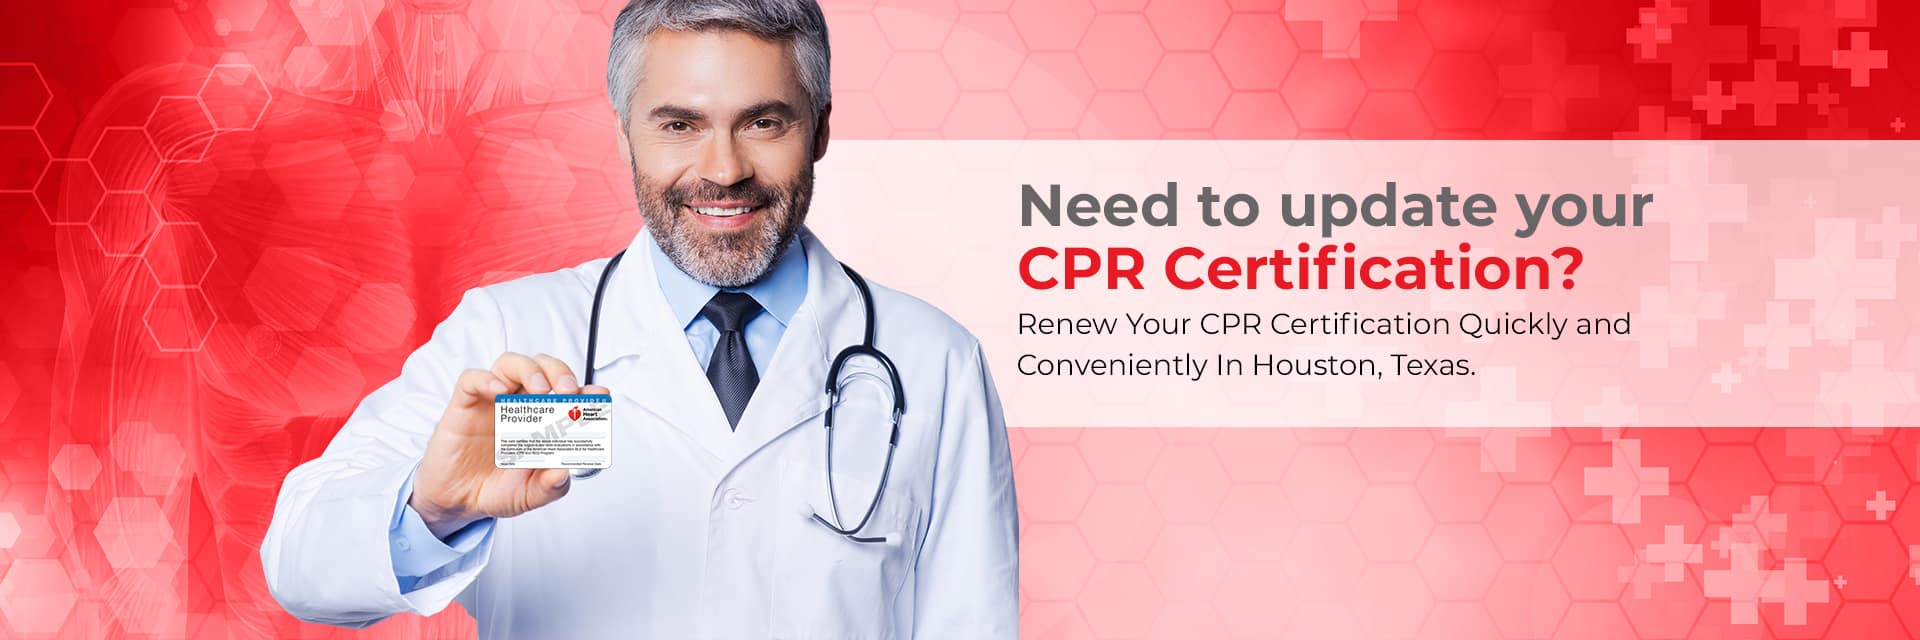 How Do I Renew My CPR Certification American Heart Association